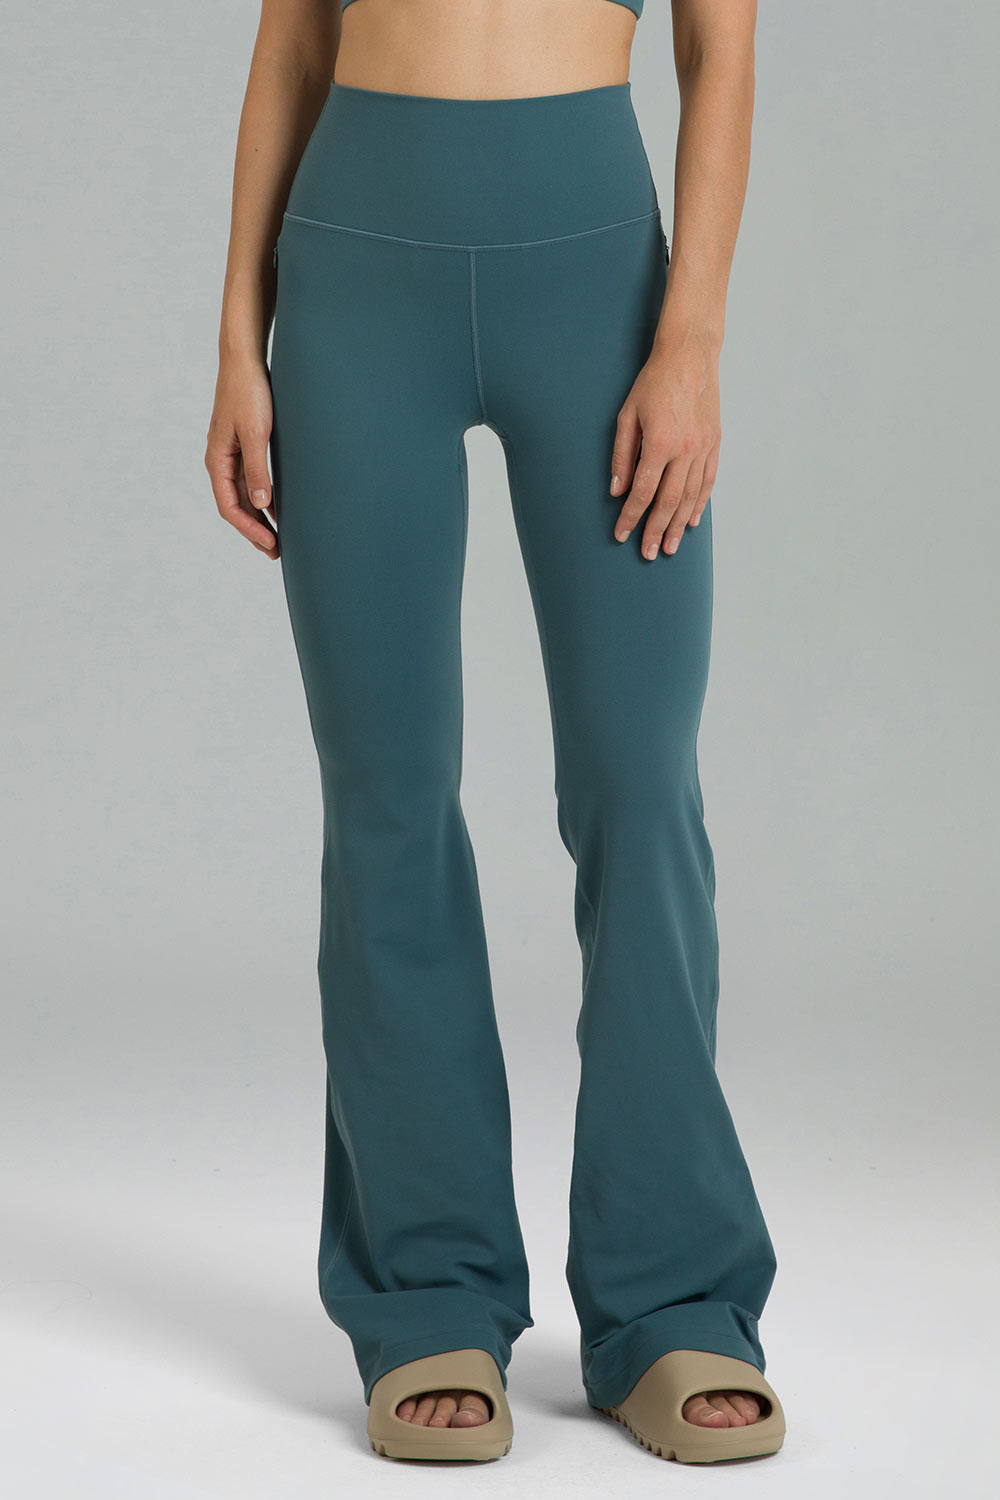 Women's FLX Mixed-Media High-Waisted Leggings with Zip Pockets